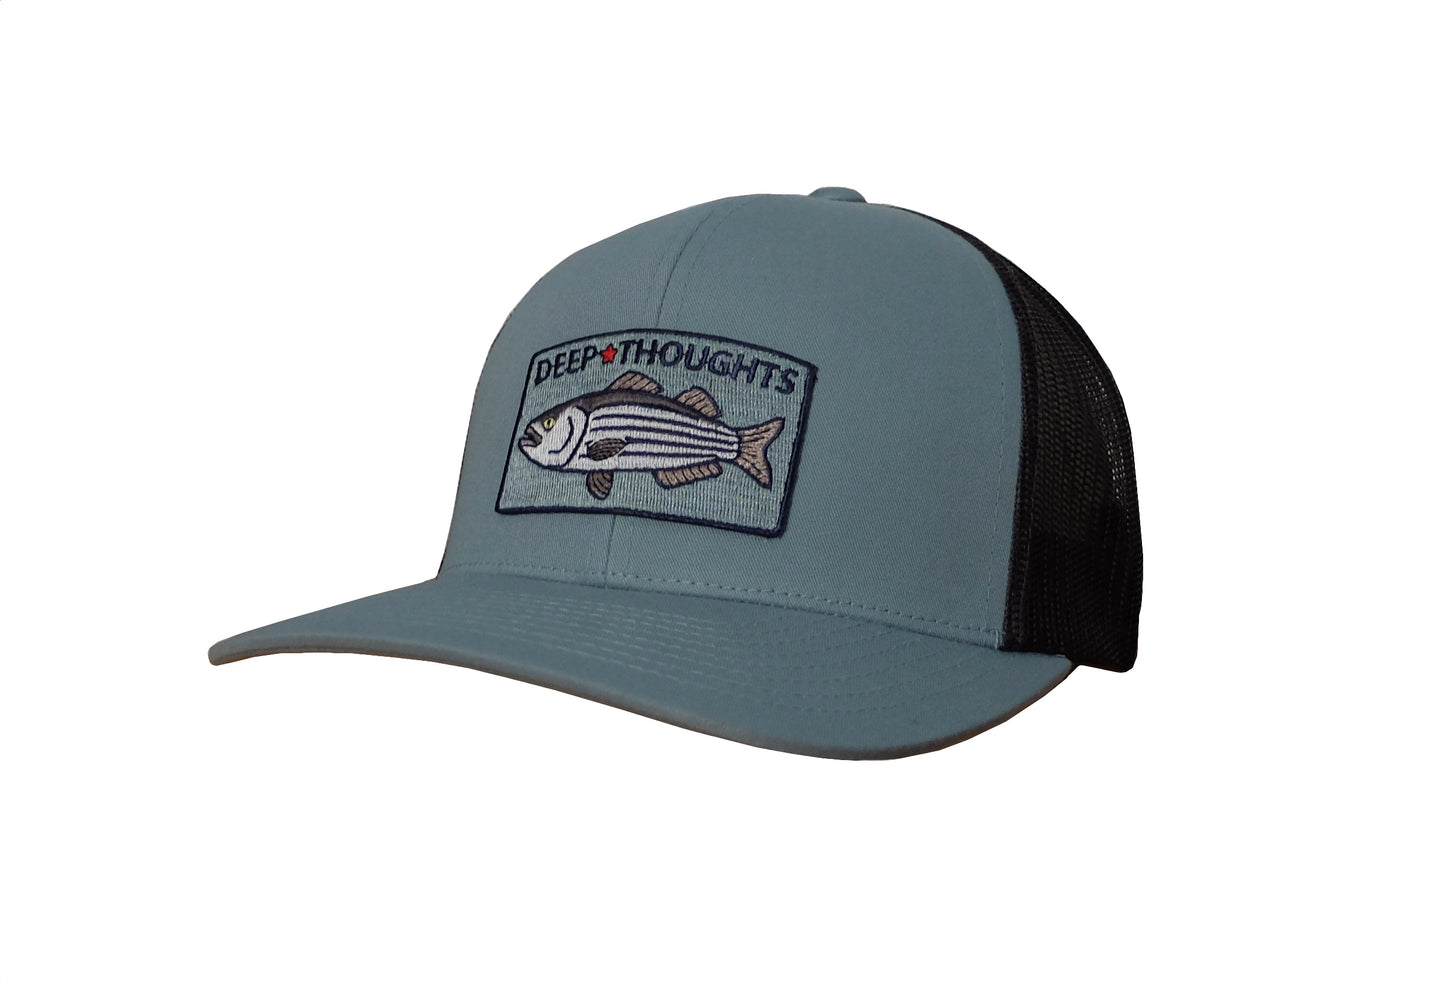 smoke blue and charcoal structured trucker hat with embroidered striped bass patch and Deep Thoughts text